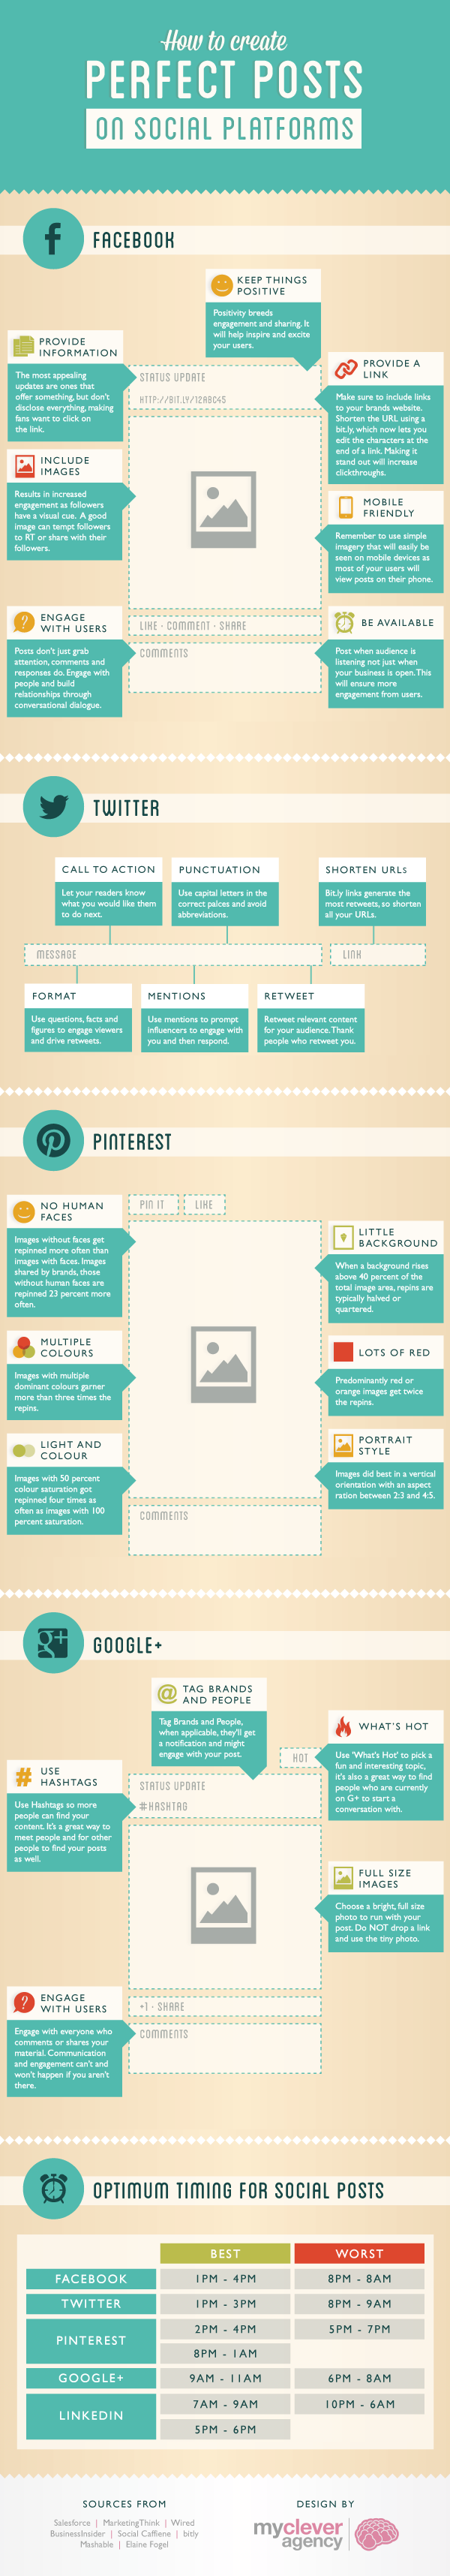 Infographic on how to write the perfect post for socialmedia